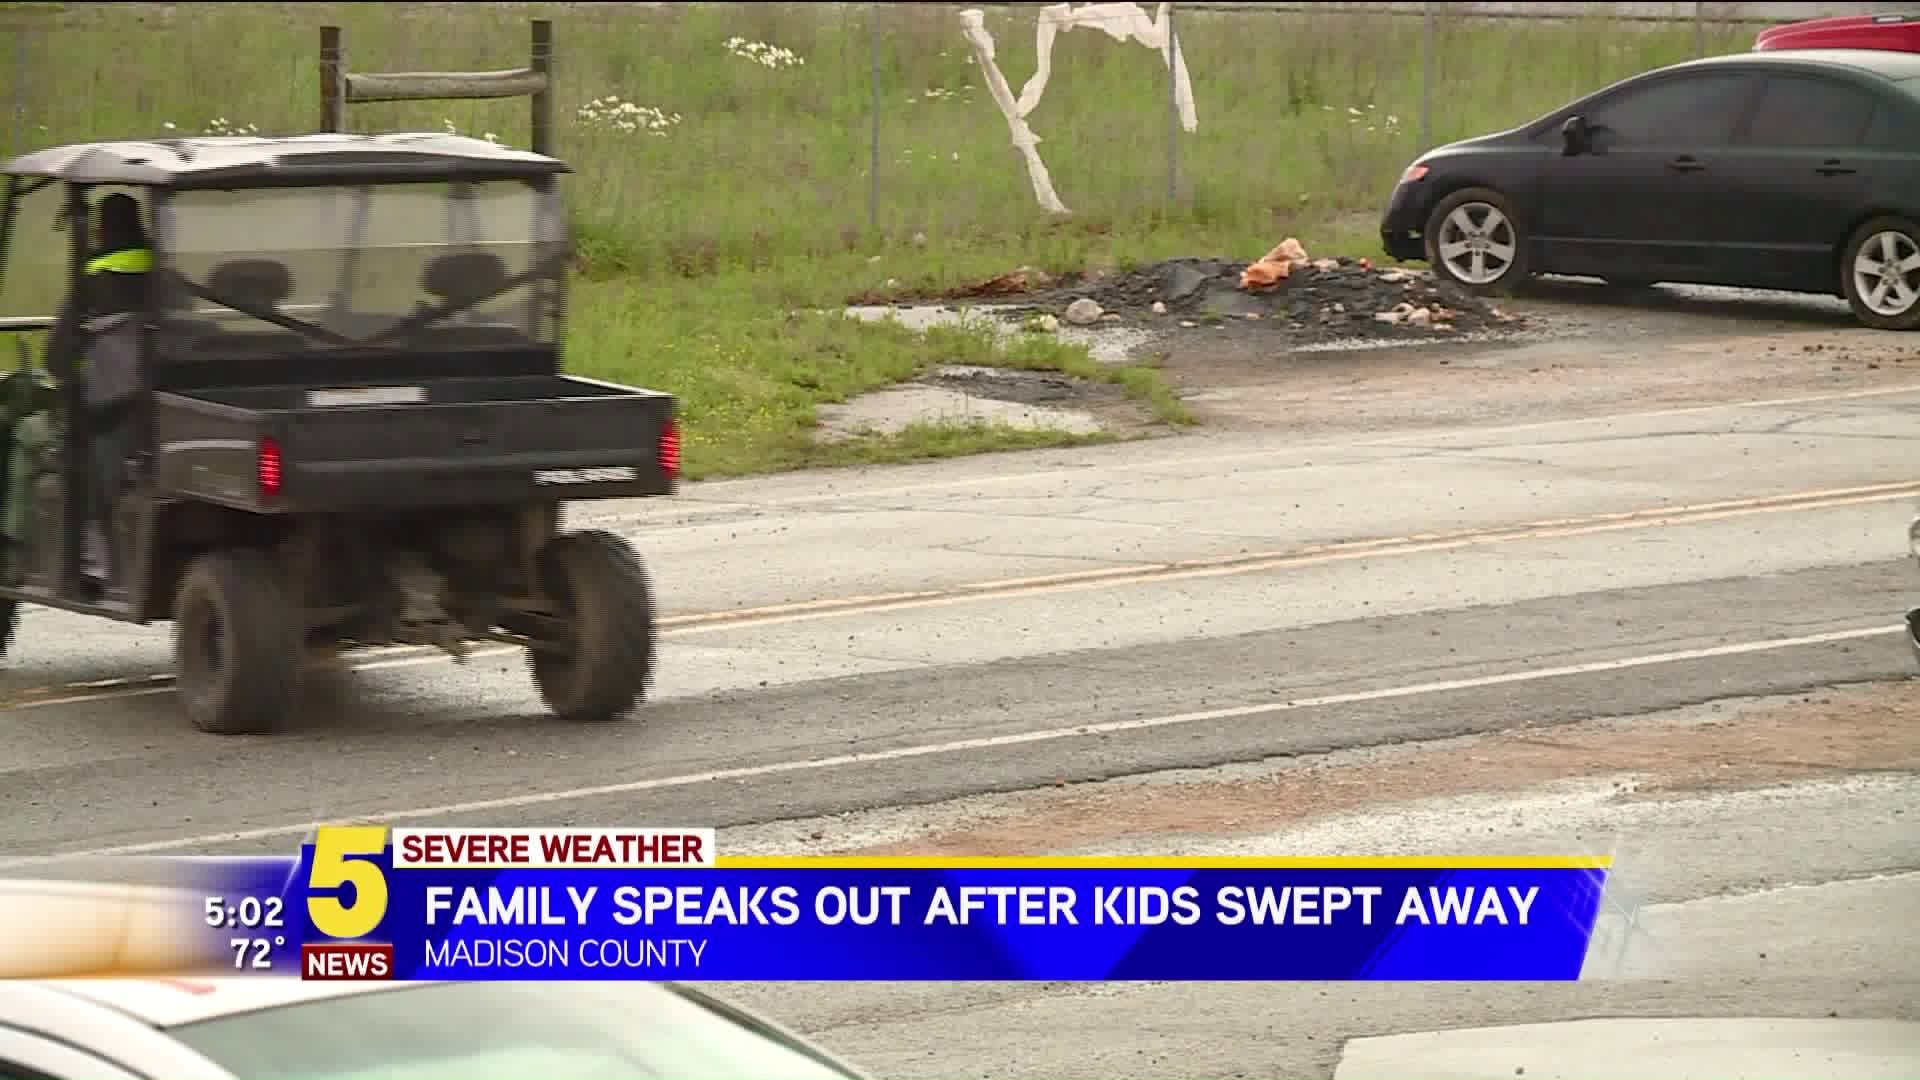 Family Speaks Out After Kids Swept Away